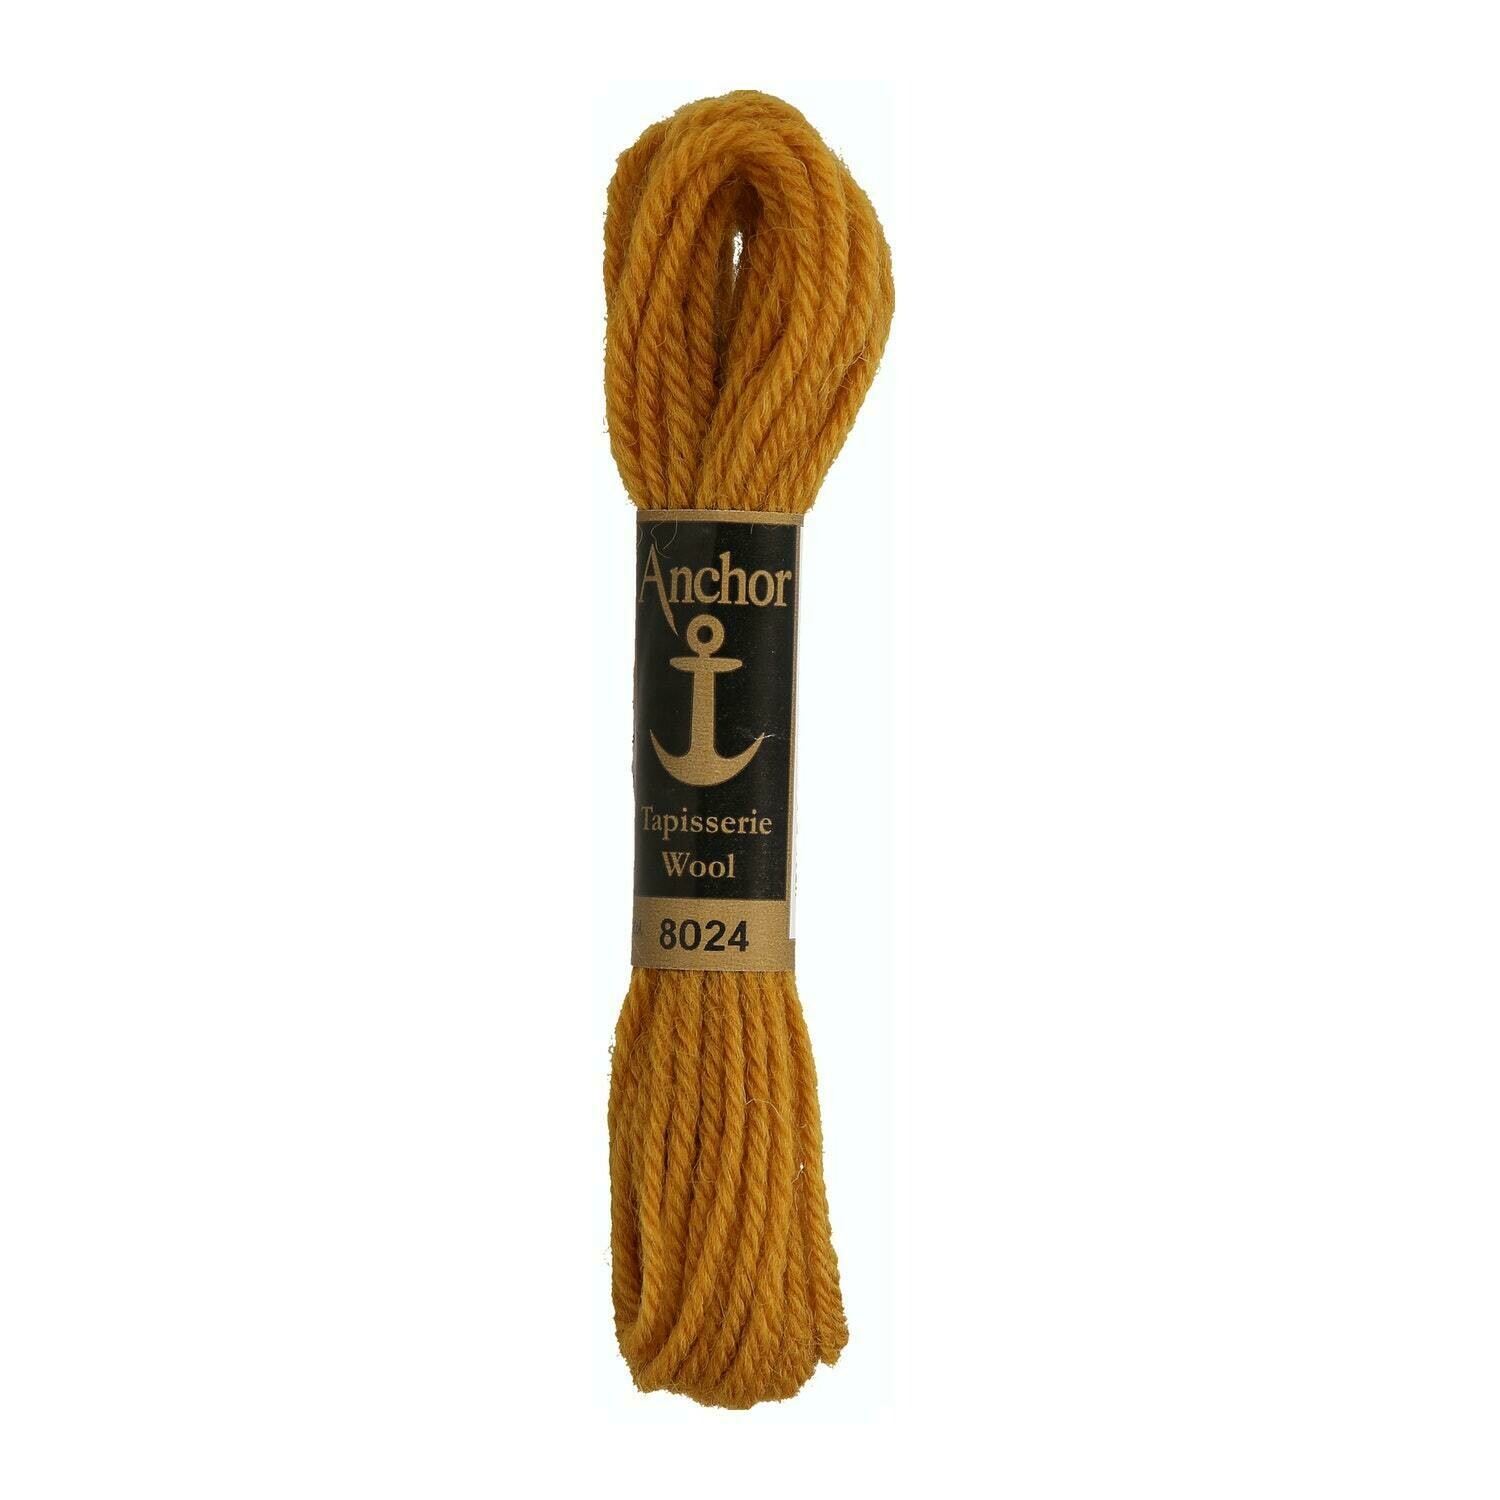 Anchor Tapisserie Wool #08024